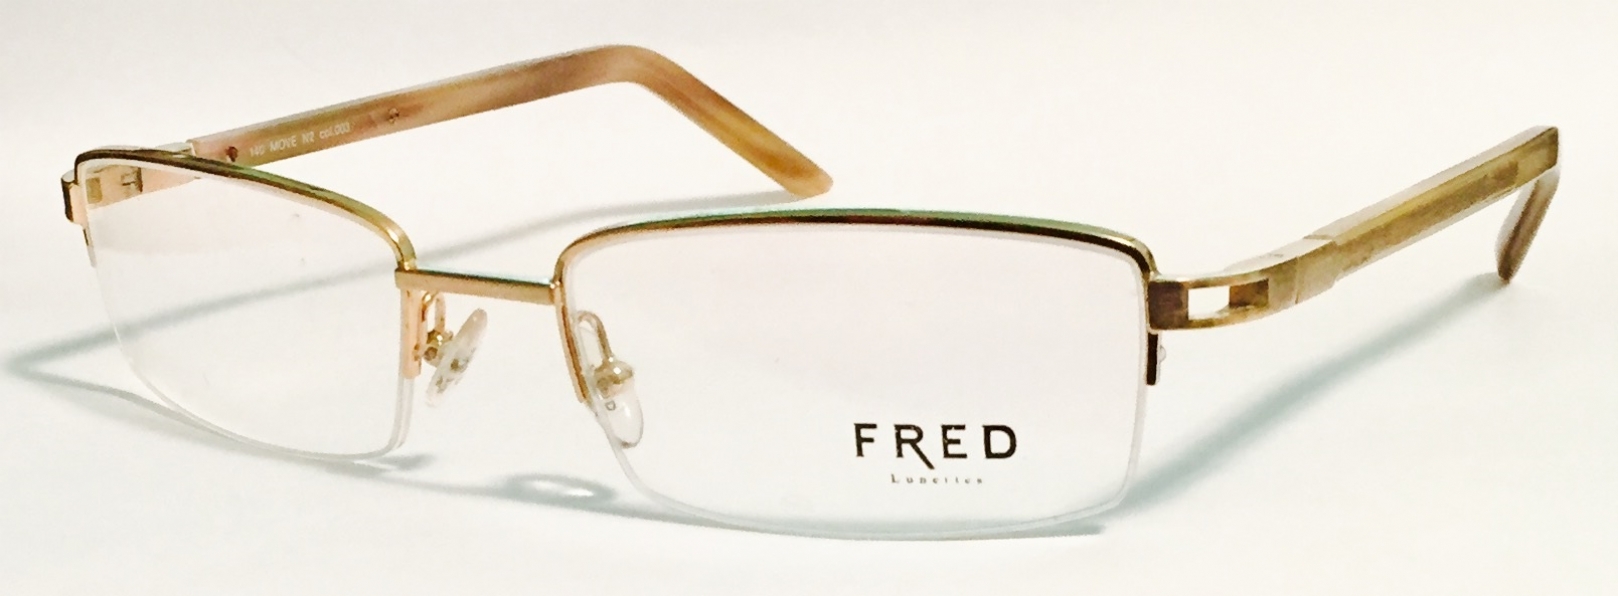 FRED  